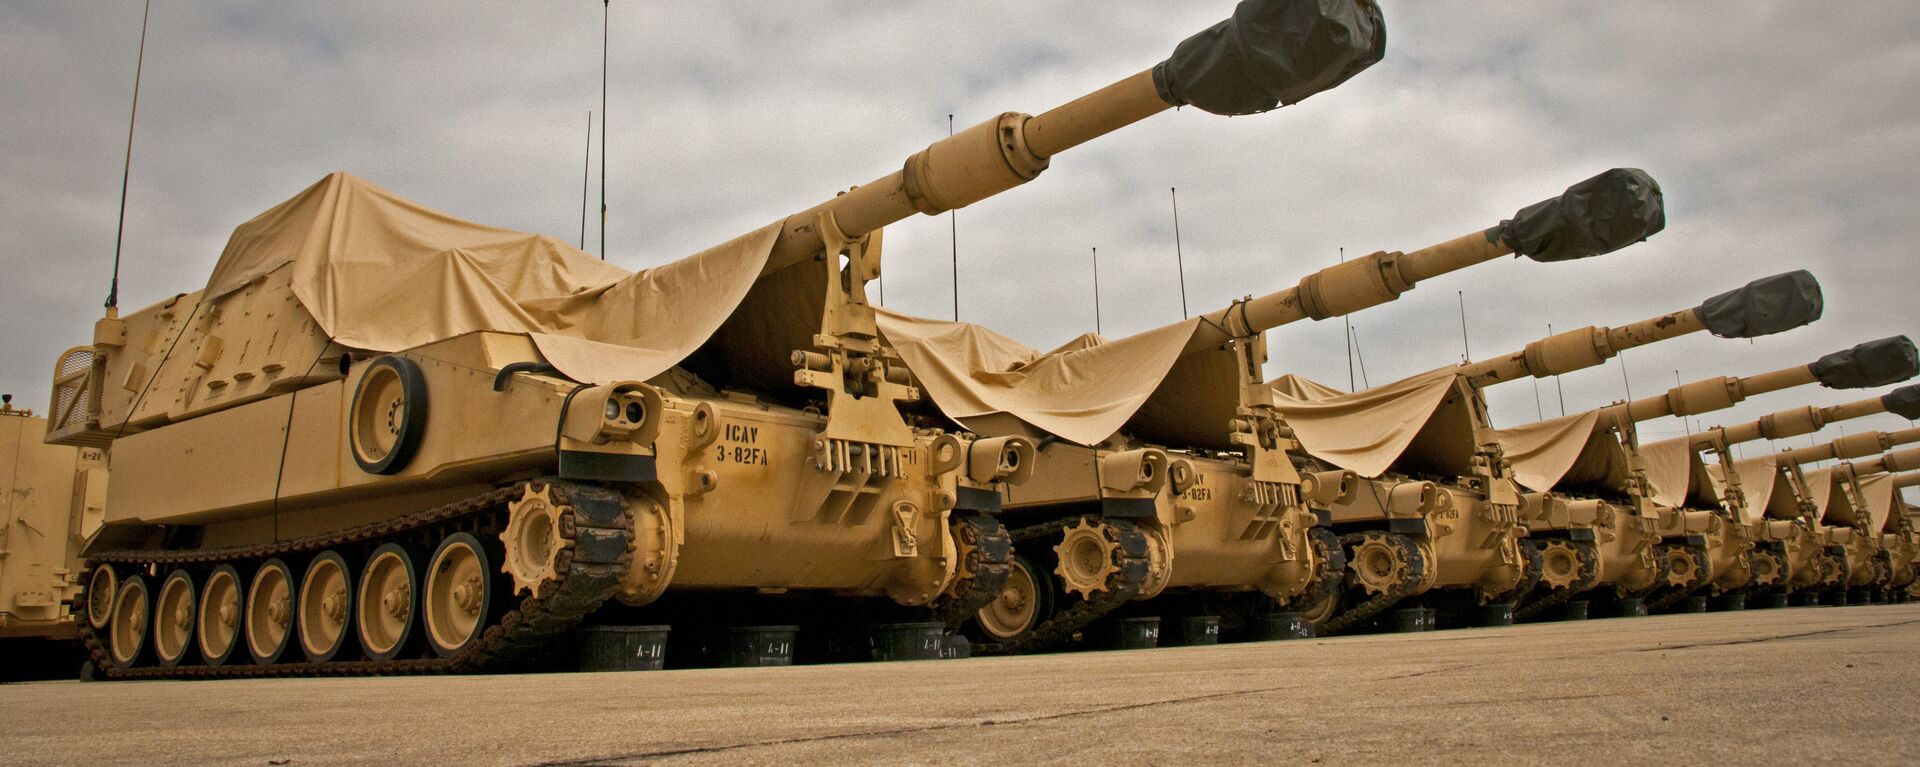 M109A6 Paladin howitzers are seen under a cloudy sky at the 3rd Battalion, 82nd Field Artillery Regiment motor pool at Fort Hood, Texas, March 22, 2013.  - Sputnik International, 1920, 12.05.2022